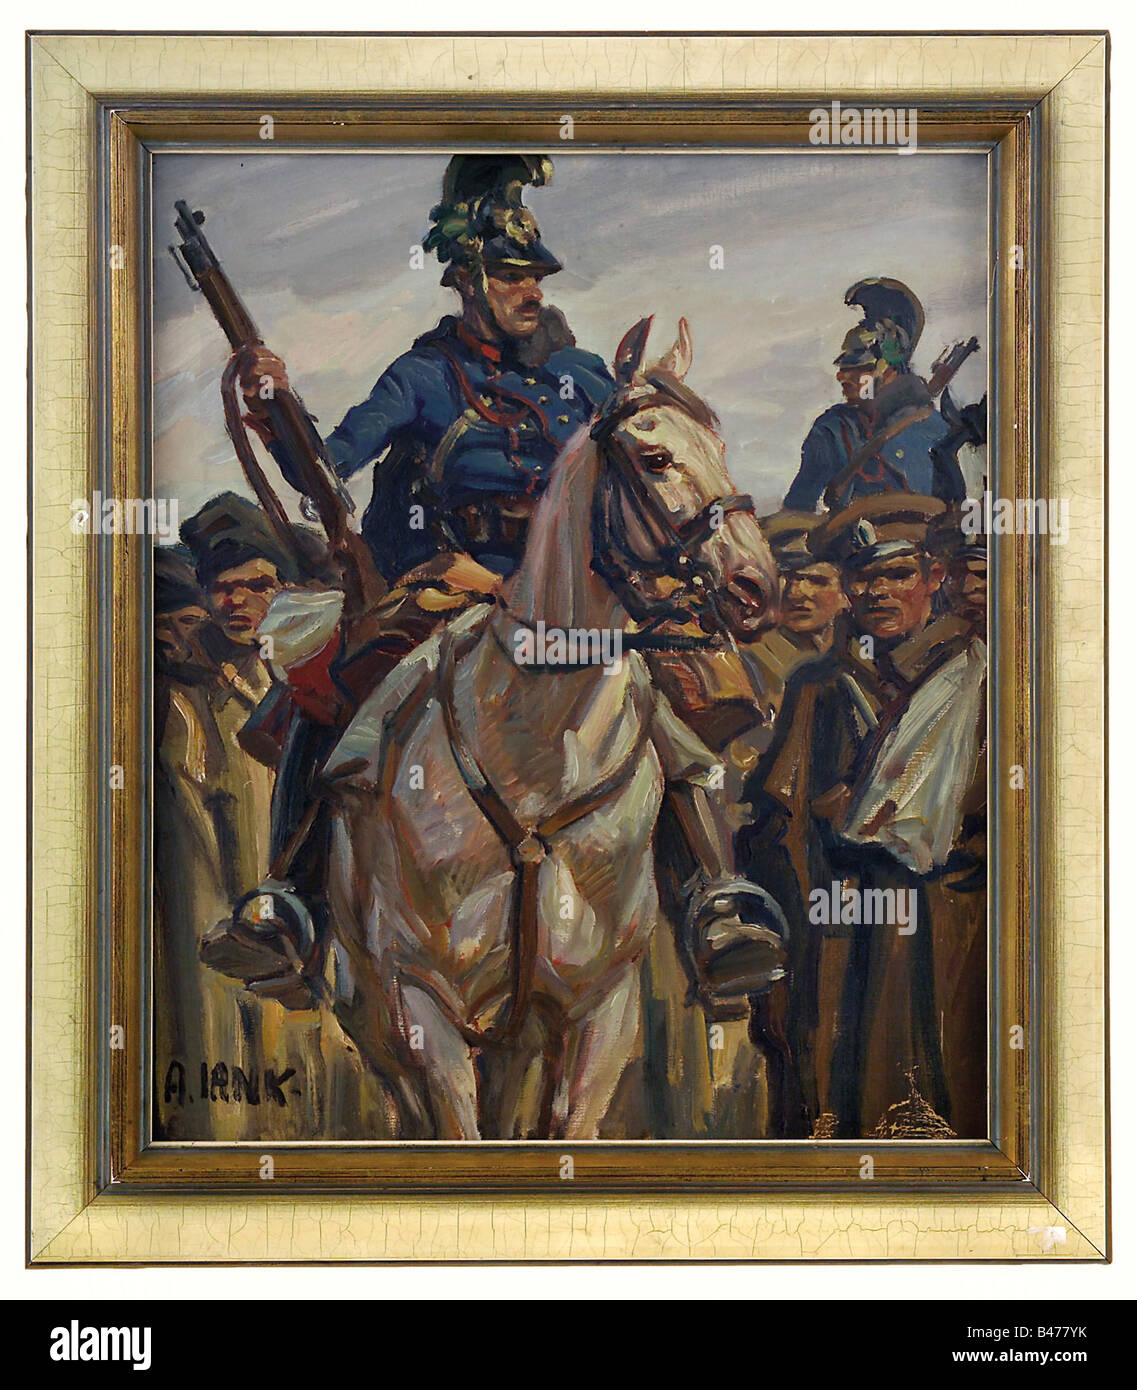 Angelo Jank (1868 - 1940), Austrian dragoons with Russian prisoners, circa 1915. Oil on canvas. Two dragoons on horseback guarding prisoners of war. Signed bottom left 'A. Jank'. Bottom right some small flaws. Modern frame. Dimensions of picture 40 x 47 cm. Dimensions with frame 51 x 58 cm. fine arts, people, 1910s, 20th century, First World War / WWI, world war, world wars, military, militaria, clipping, cut out, cut-out, cut-outs, object, objects, stills, painting, paintings, fine arts, art, illustration, man, men, male, Artist's Copyright has not to be cleared Stock Photo